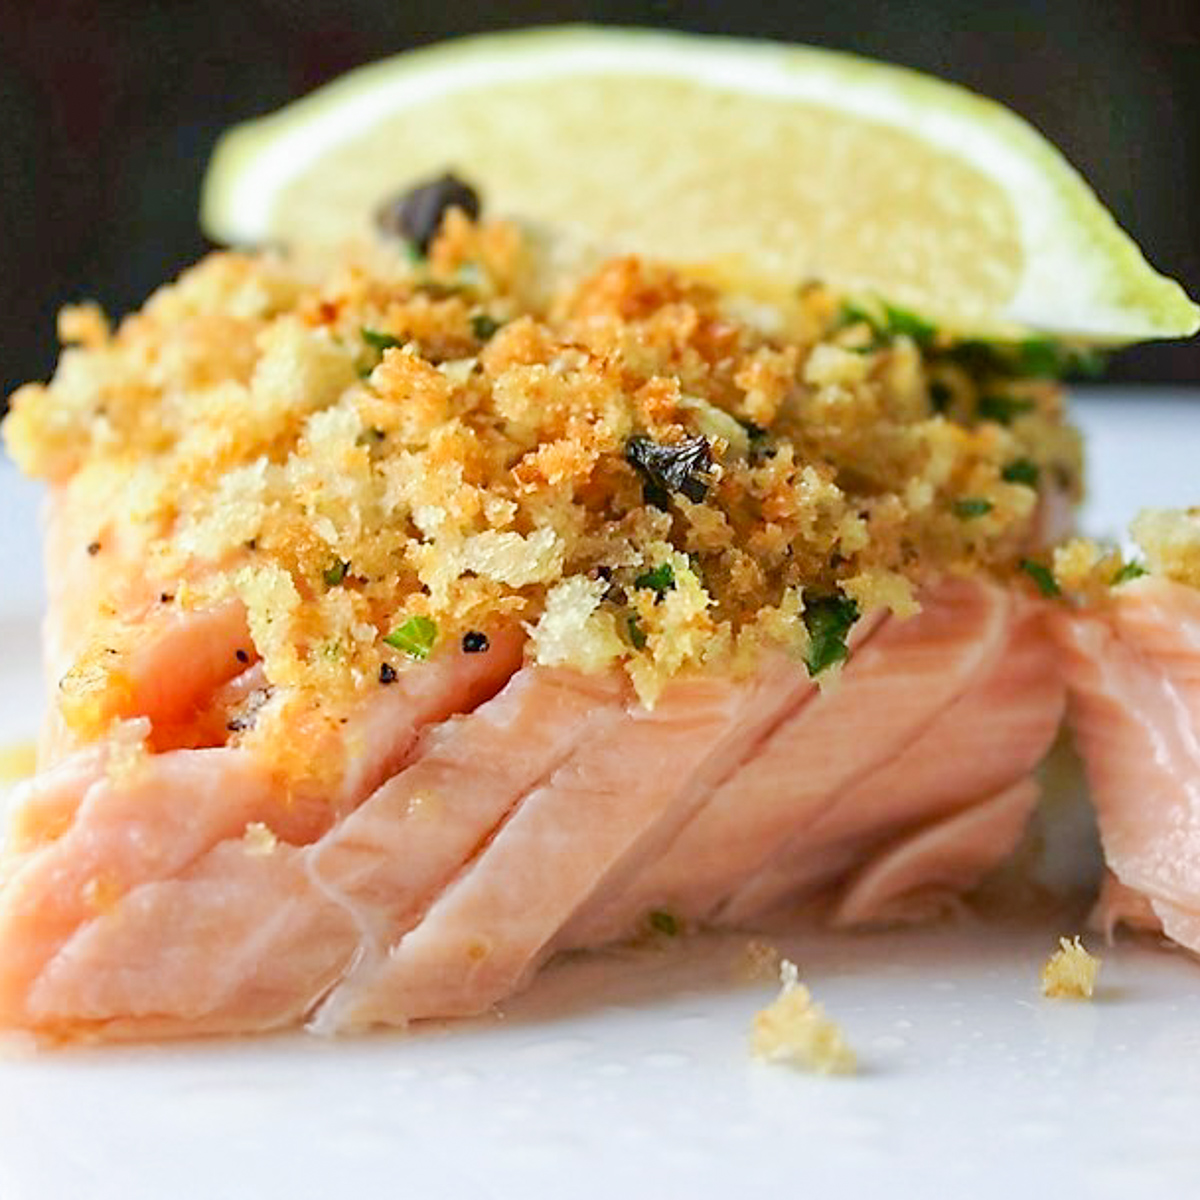 piece of salmon with panko crust on plate and lemon wedge